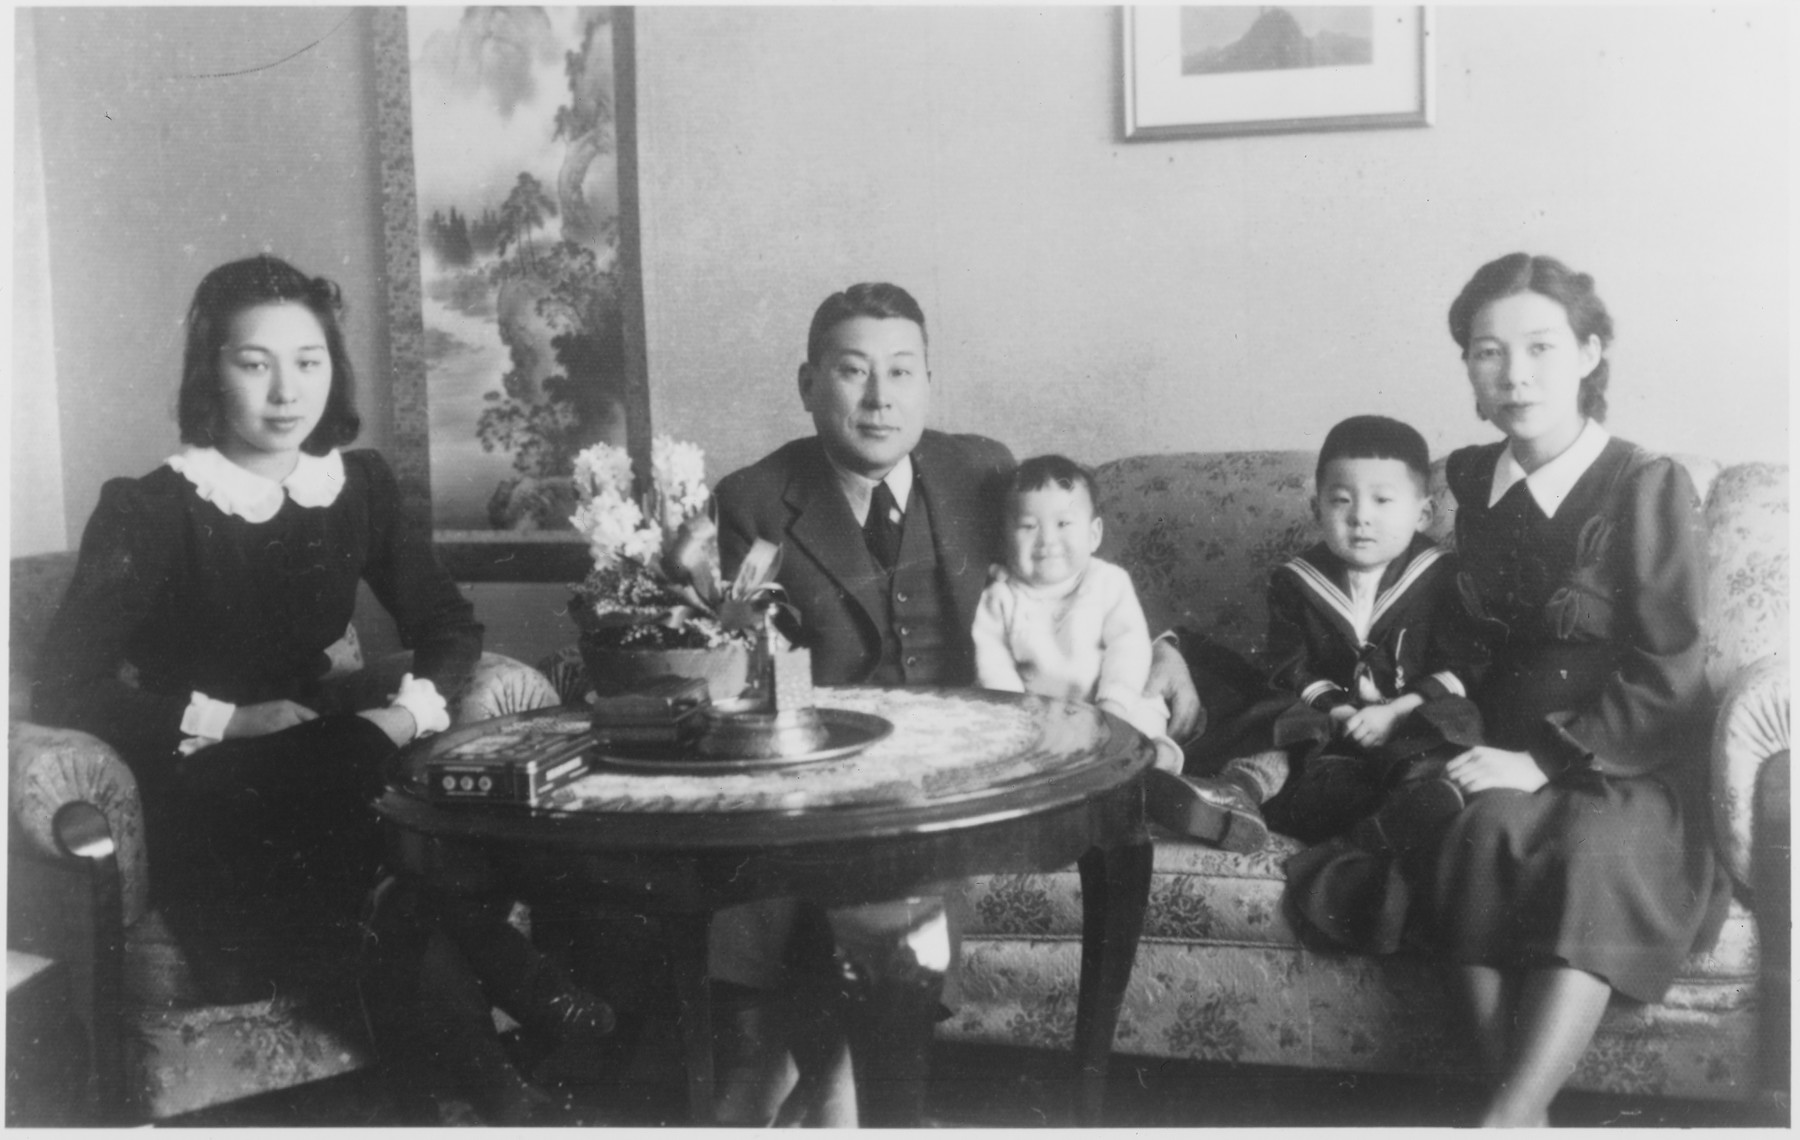 The Sugihara family sits in the living room of their residence in Kaunas shortly after their arrival.  

Seated from left to right are: Setsuko Kikuchi (Yukiko's sister), Chiune Sugihara, Chiaki, Hiroki, and Yukiko Sugihara.